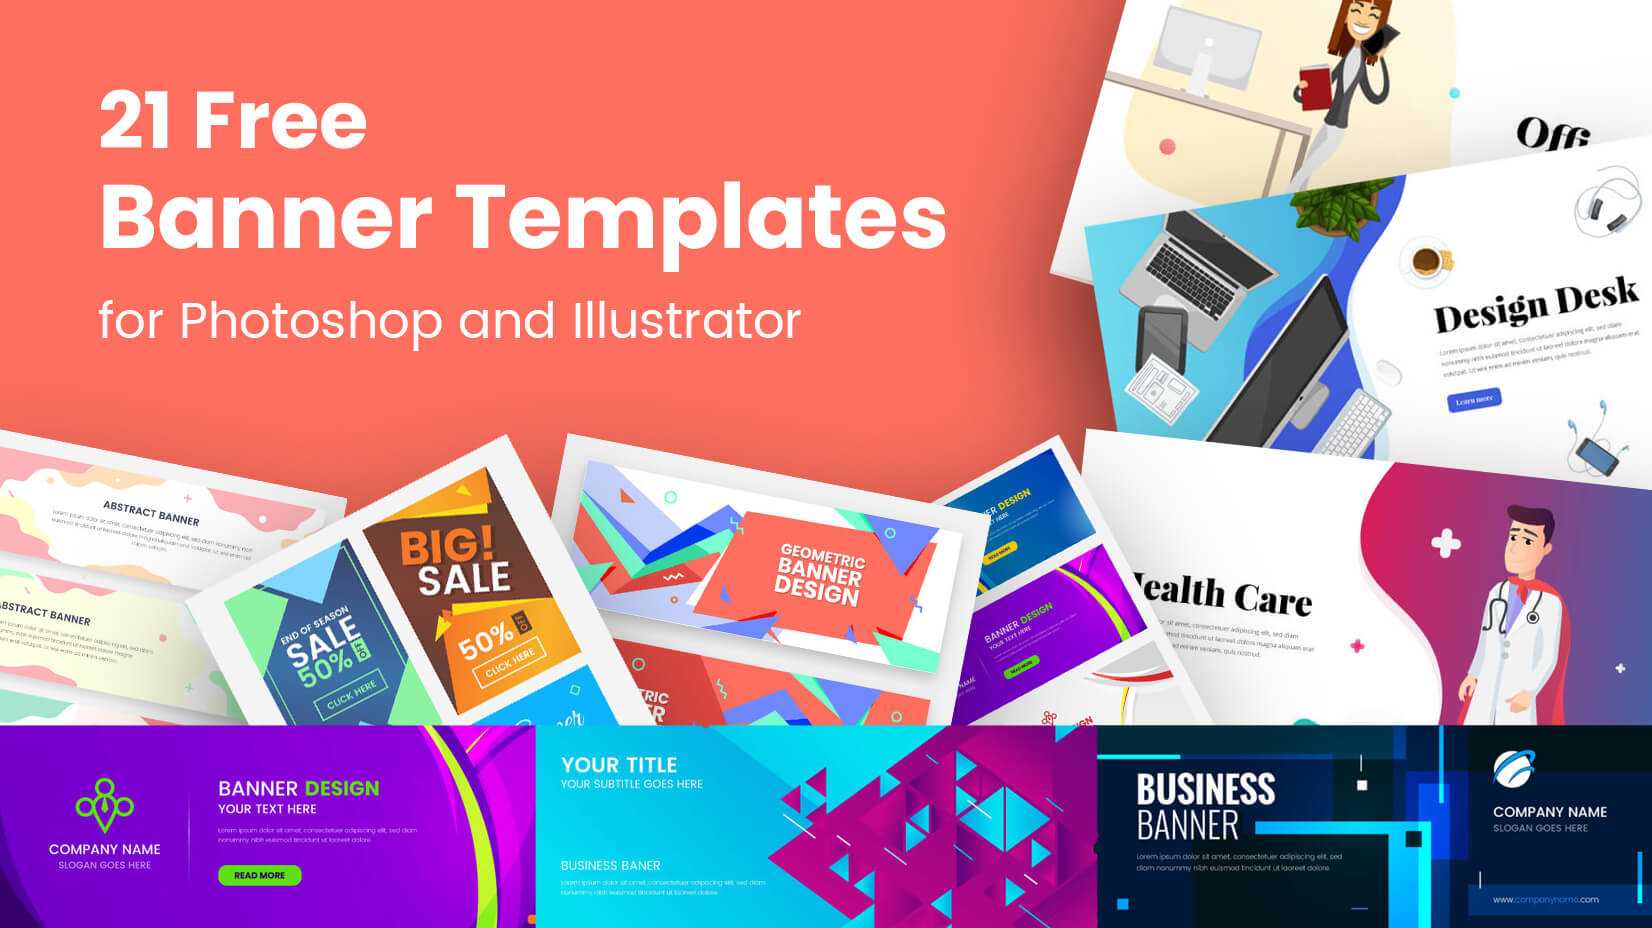 21 Free Banner Templates For Photoshop And Illustrator Within Adobe Photoshop Banner Templates